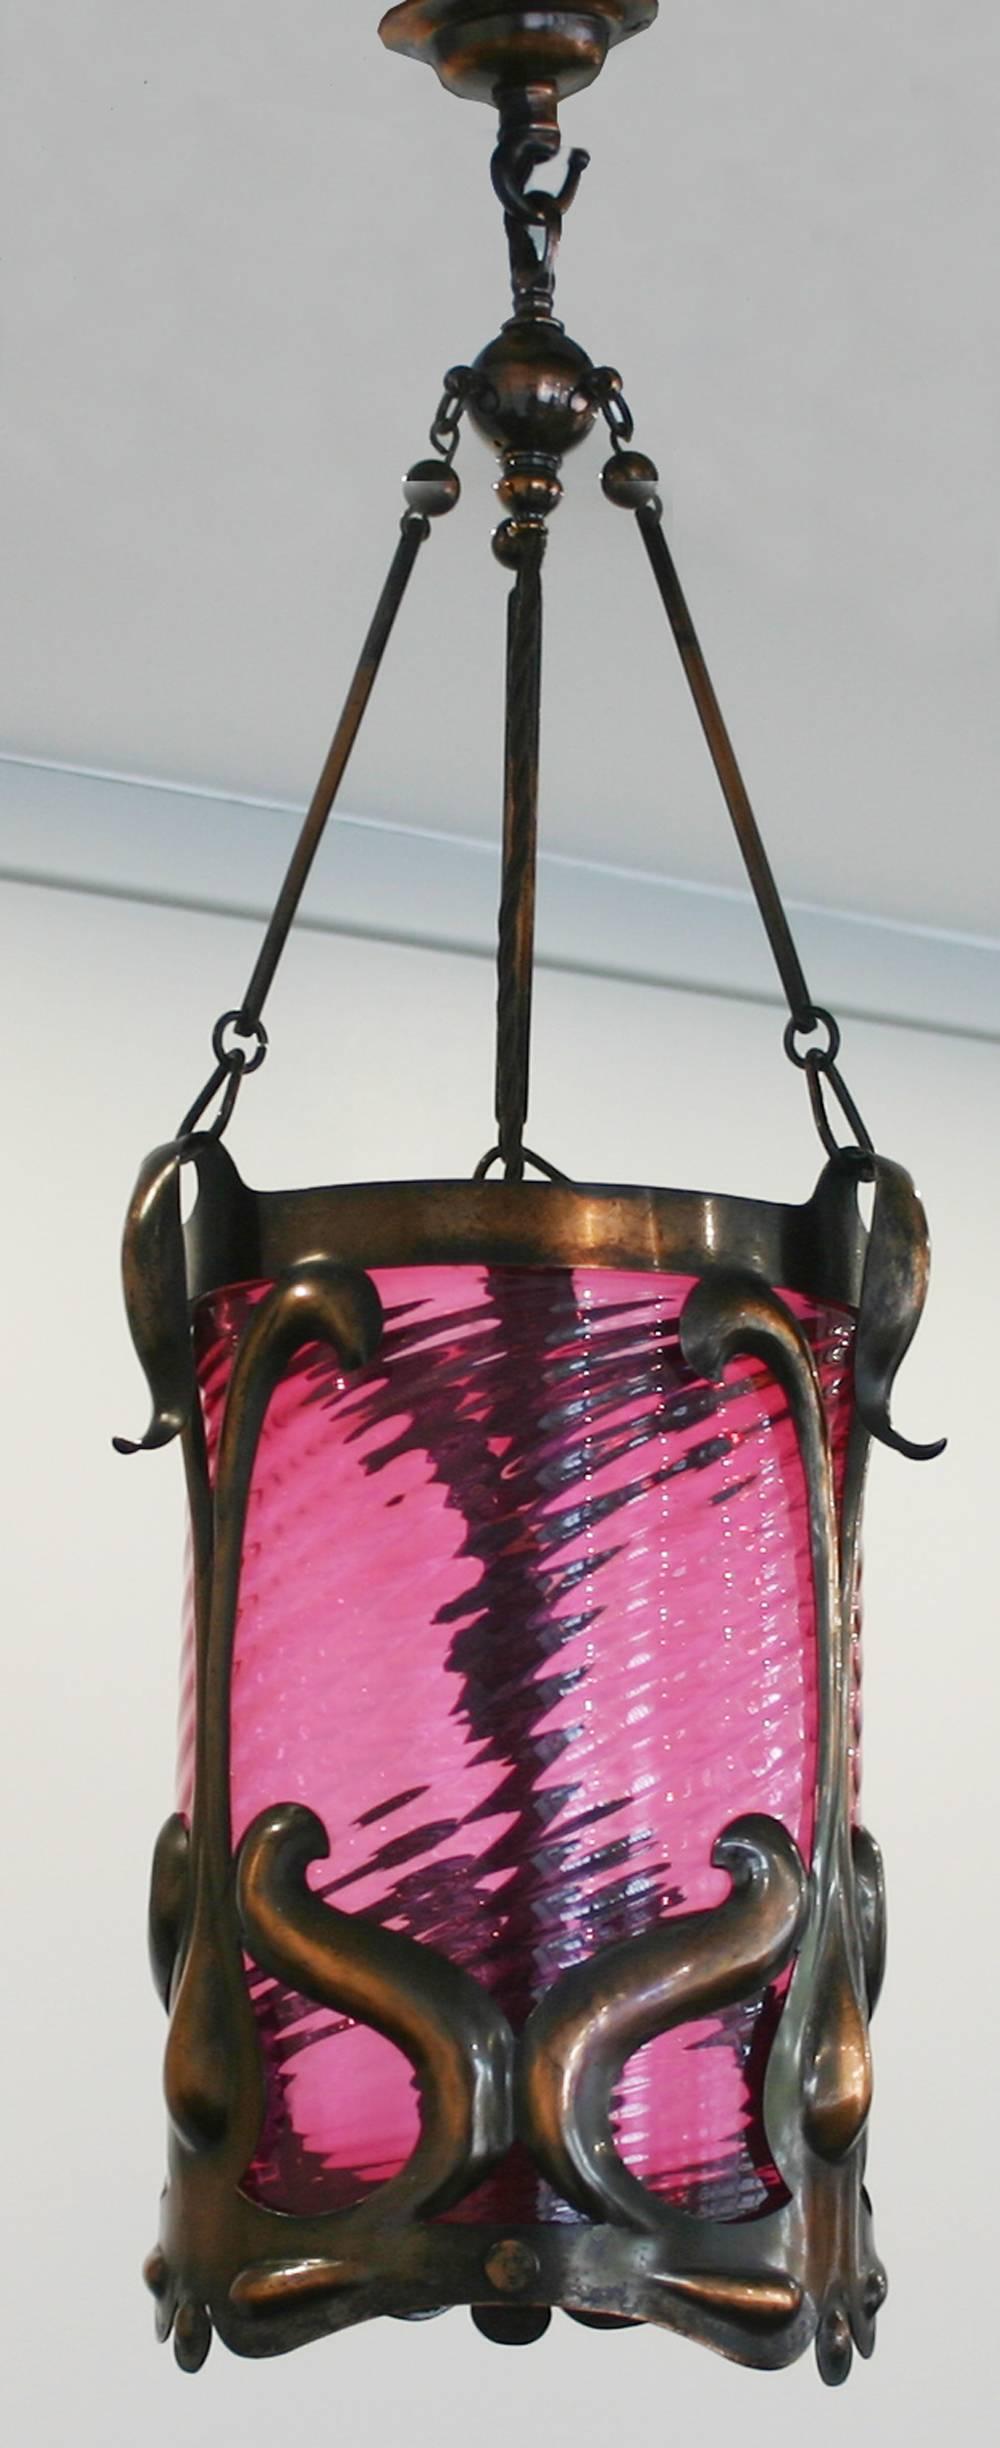 Antique Edwardian Art Nouveau hall lantern. Fine copper frame with beautiful patina hold a spiral cranberry glass shade.